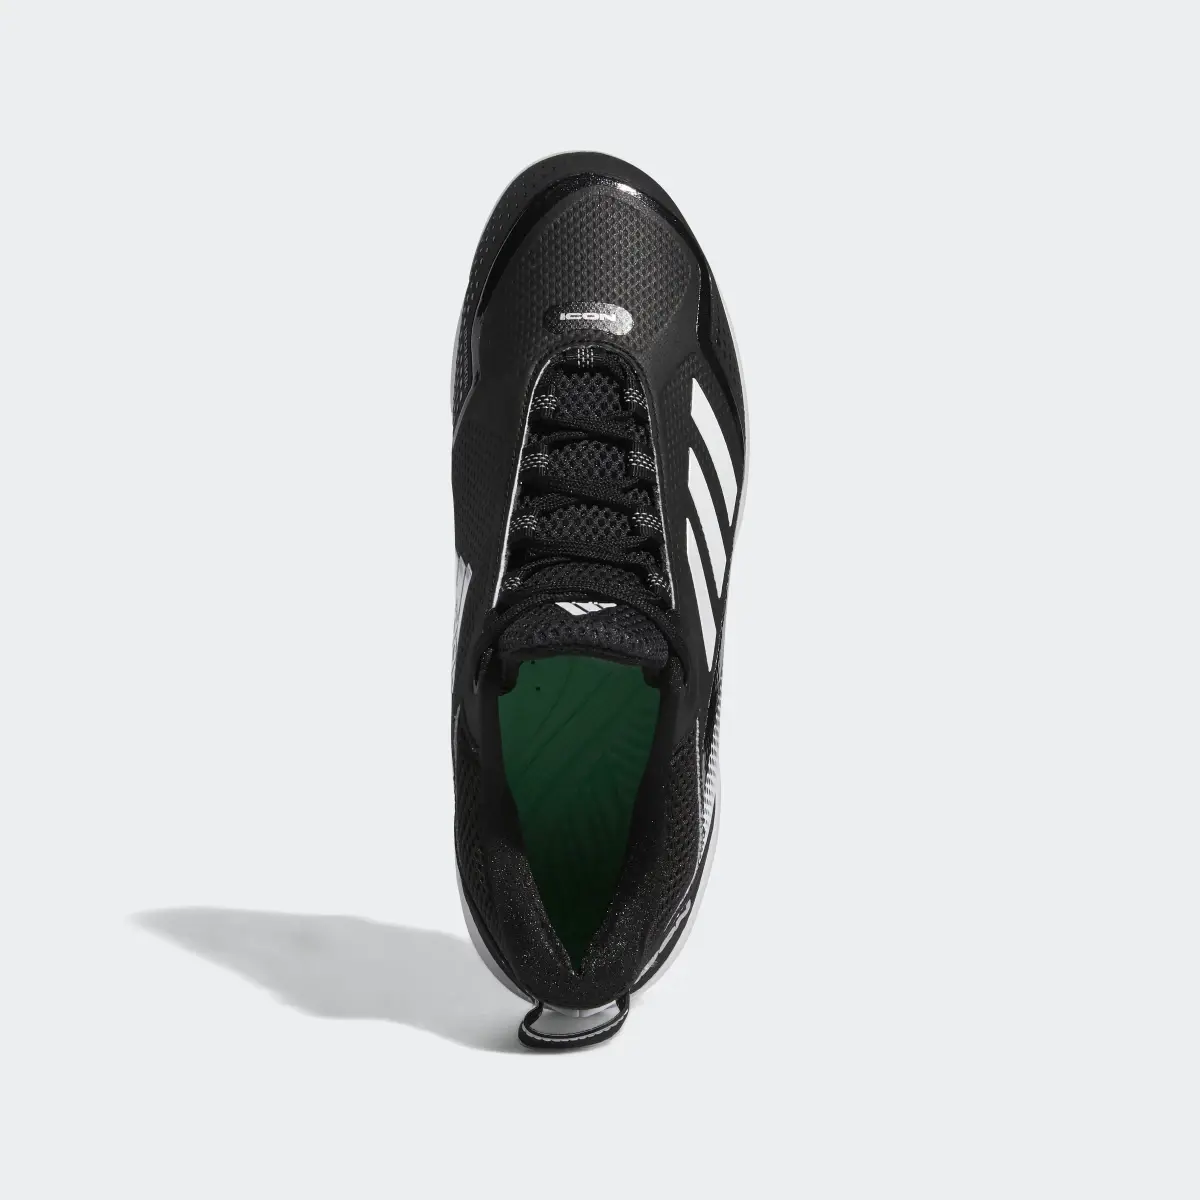 Adidas Icon 7 Cleats. 3